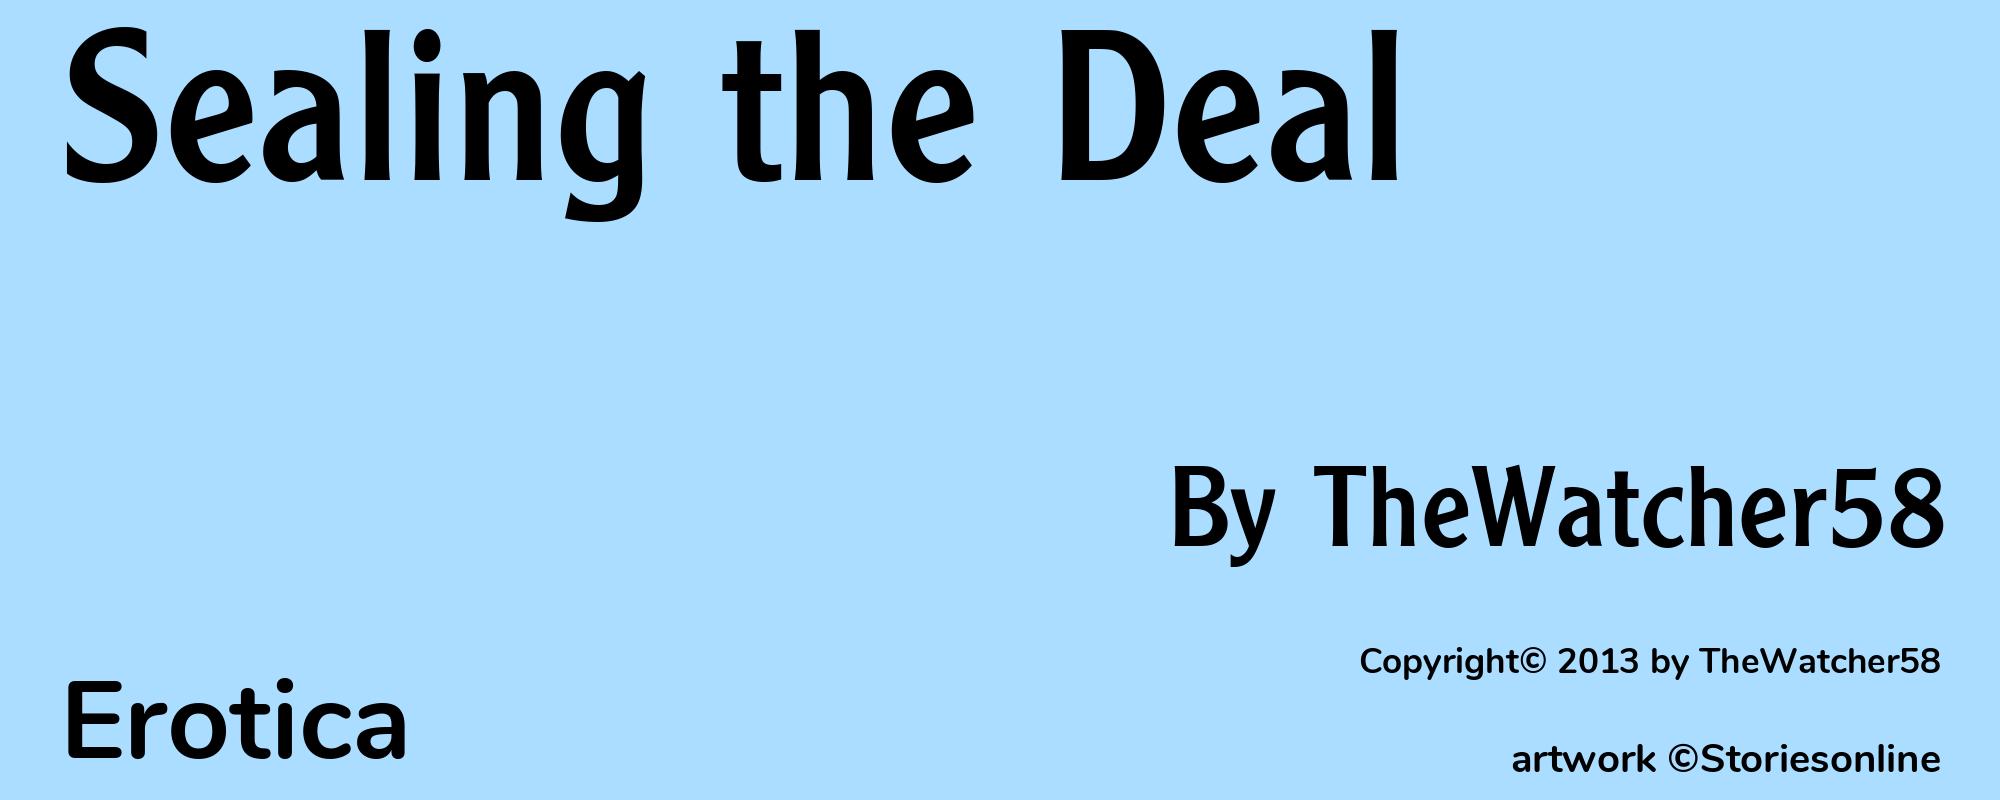 Sealing the Deal - Cover